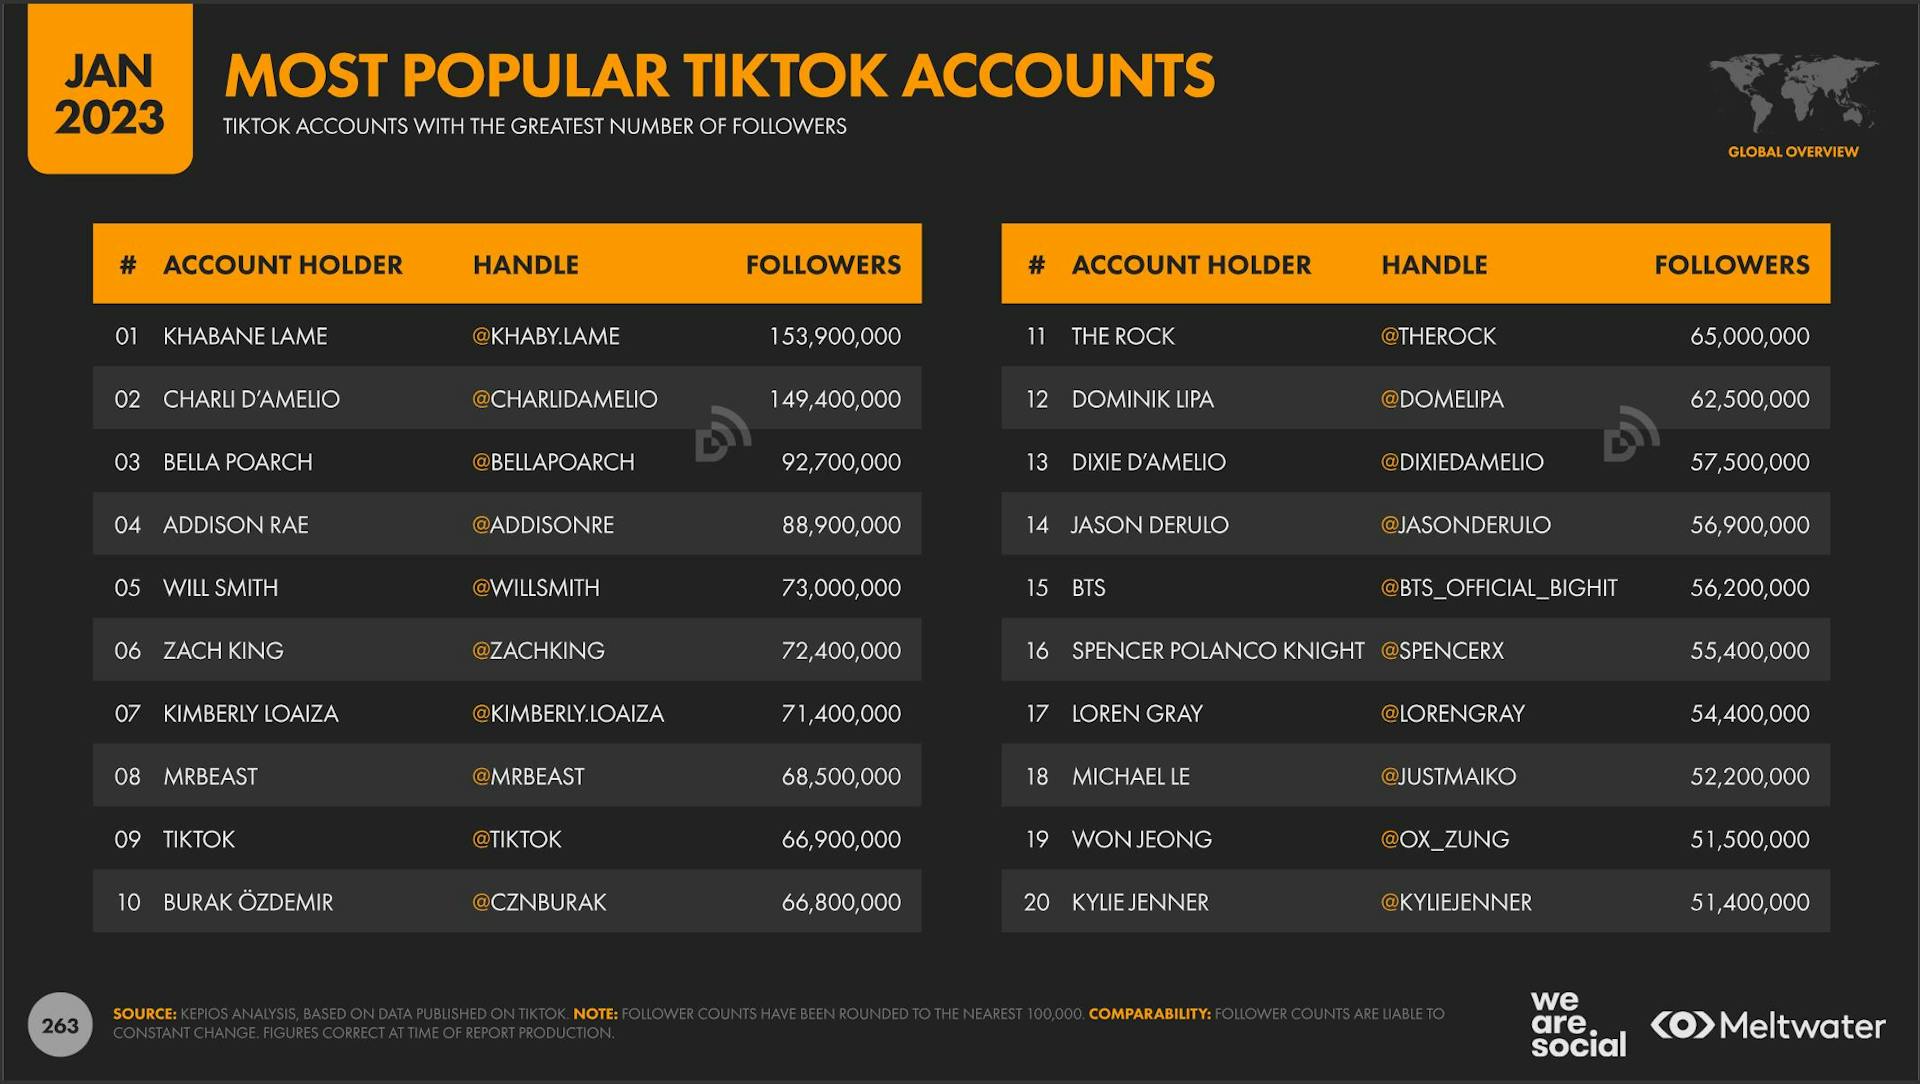 A list of the most popular TikTok accounts as of January 2023 with user @khaby.lame at the top of the list with 153.9 million followers.